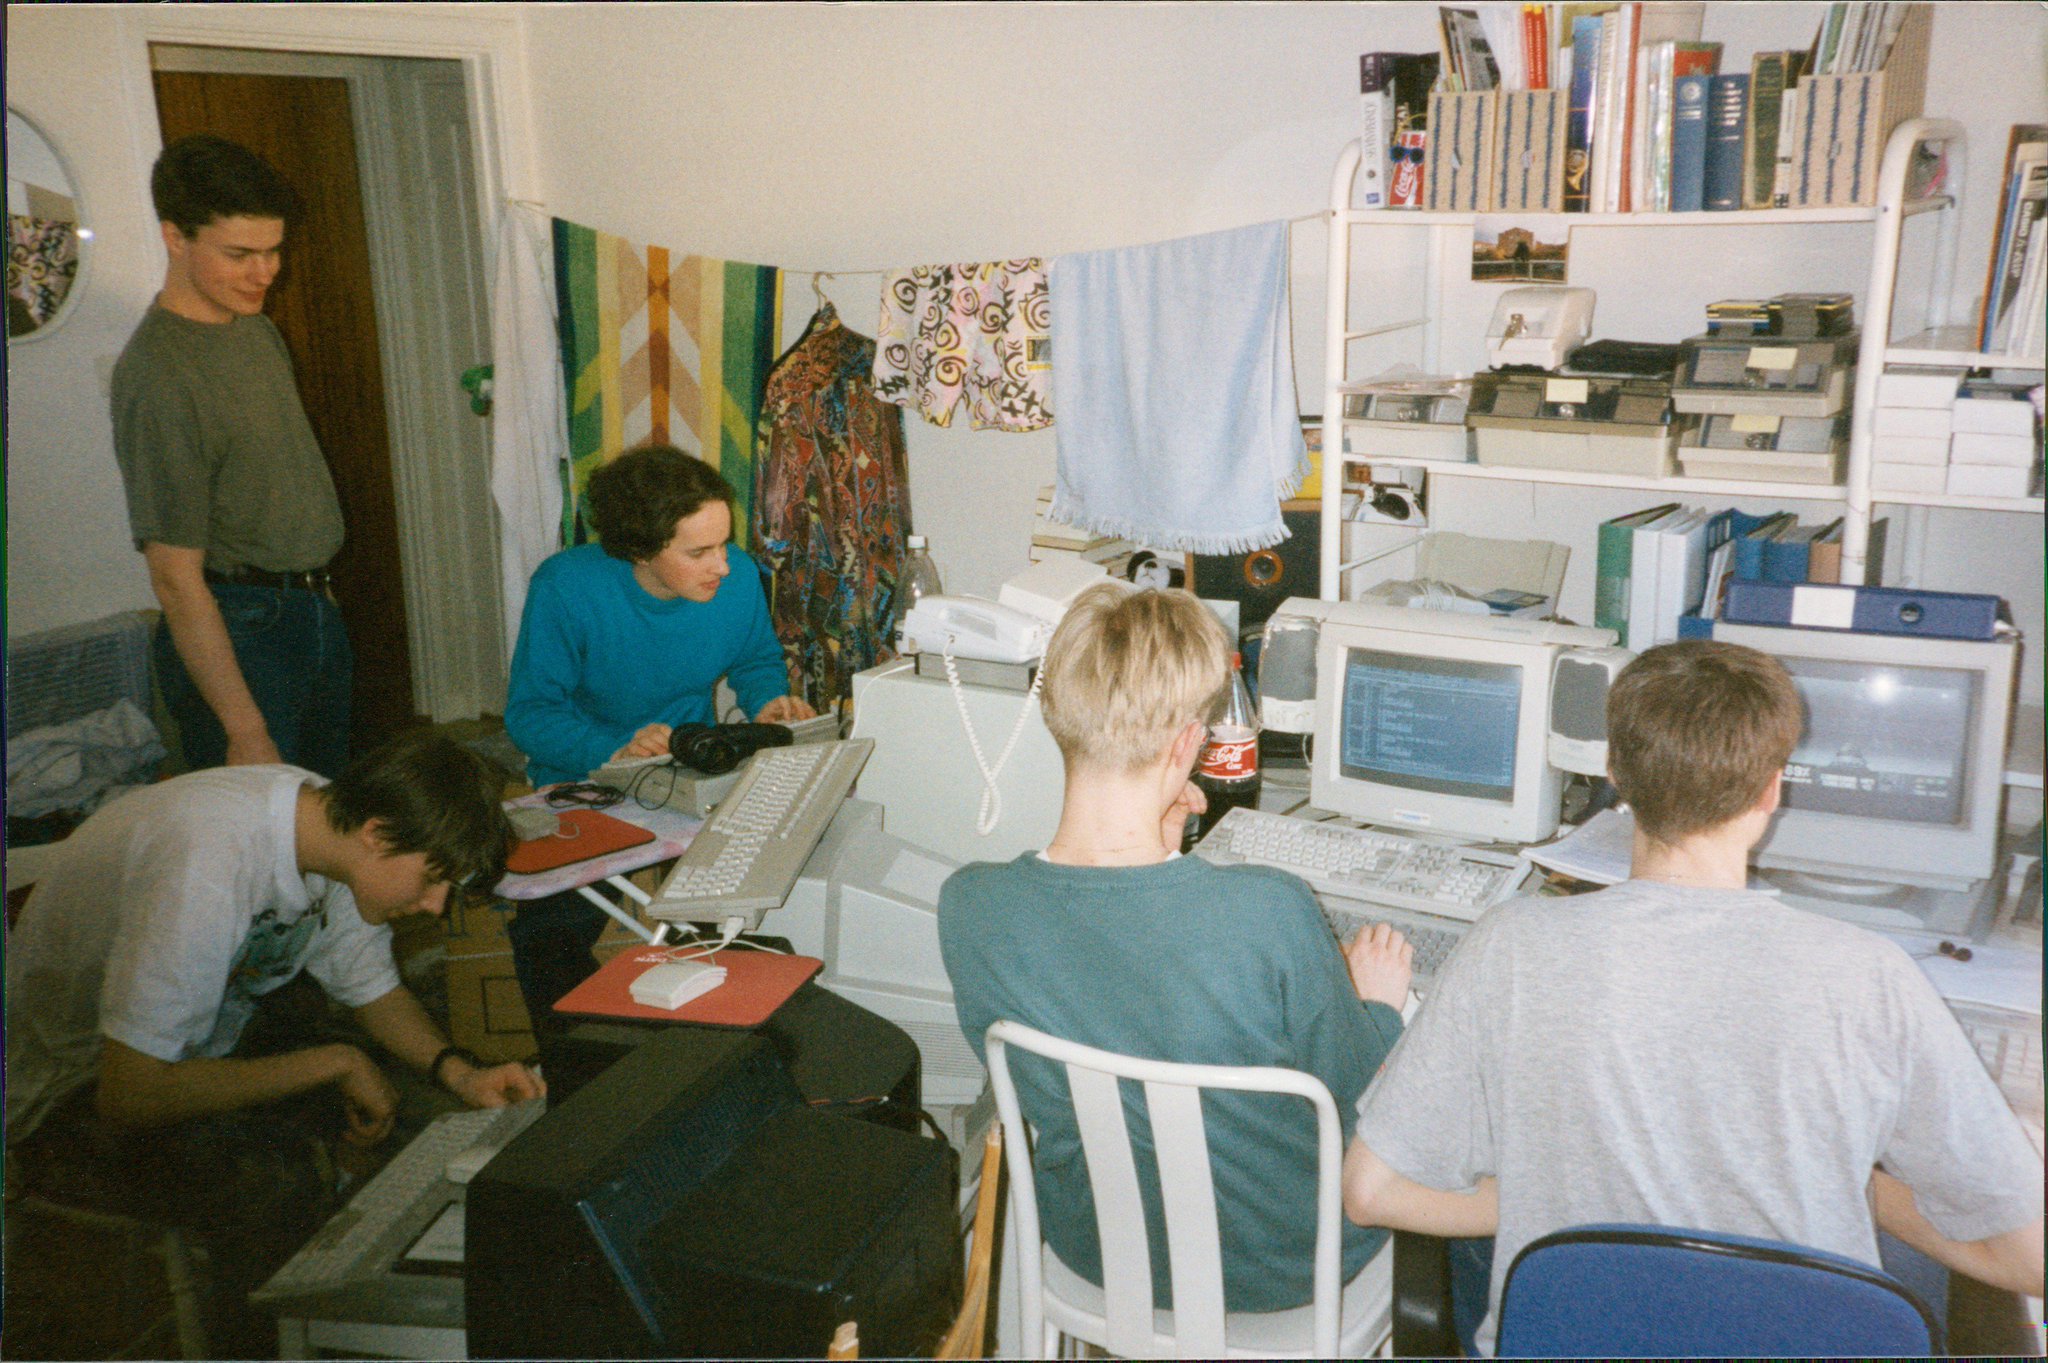 This picture was taken before UDS had an actual office. The Substation team came together during a long weekend off school for a 'coding sprint' (more info in the interview).